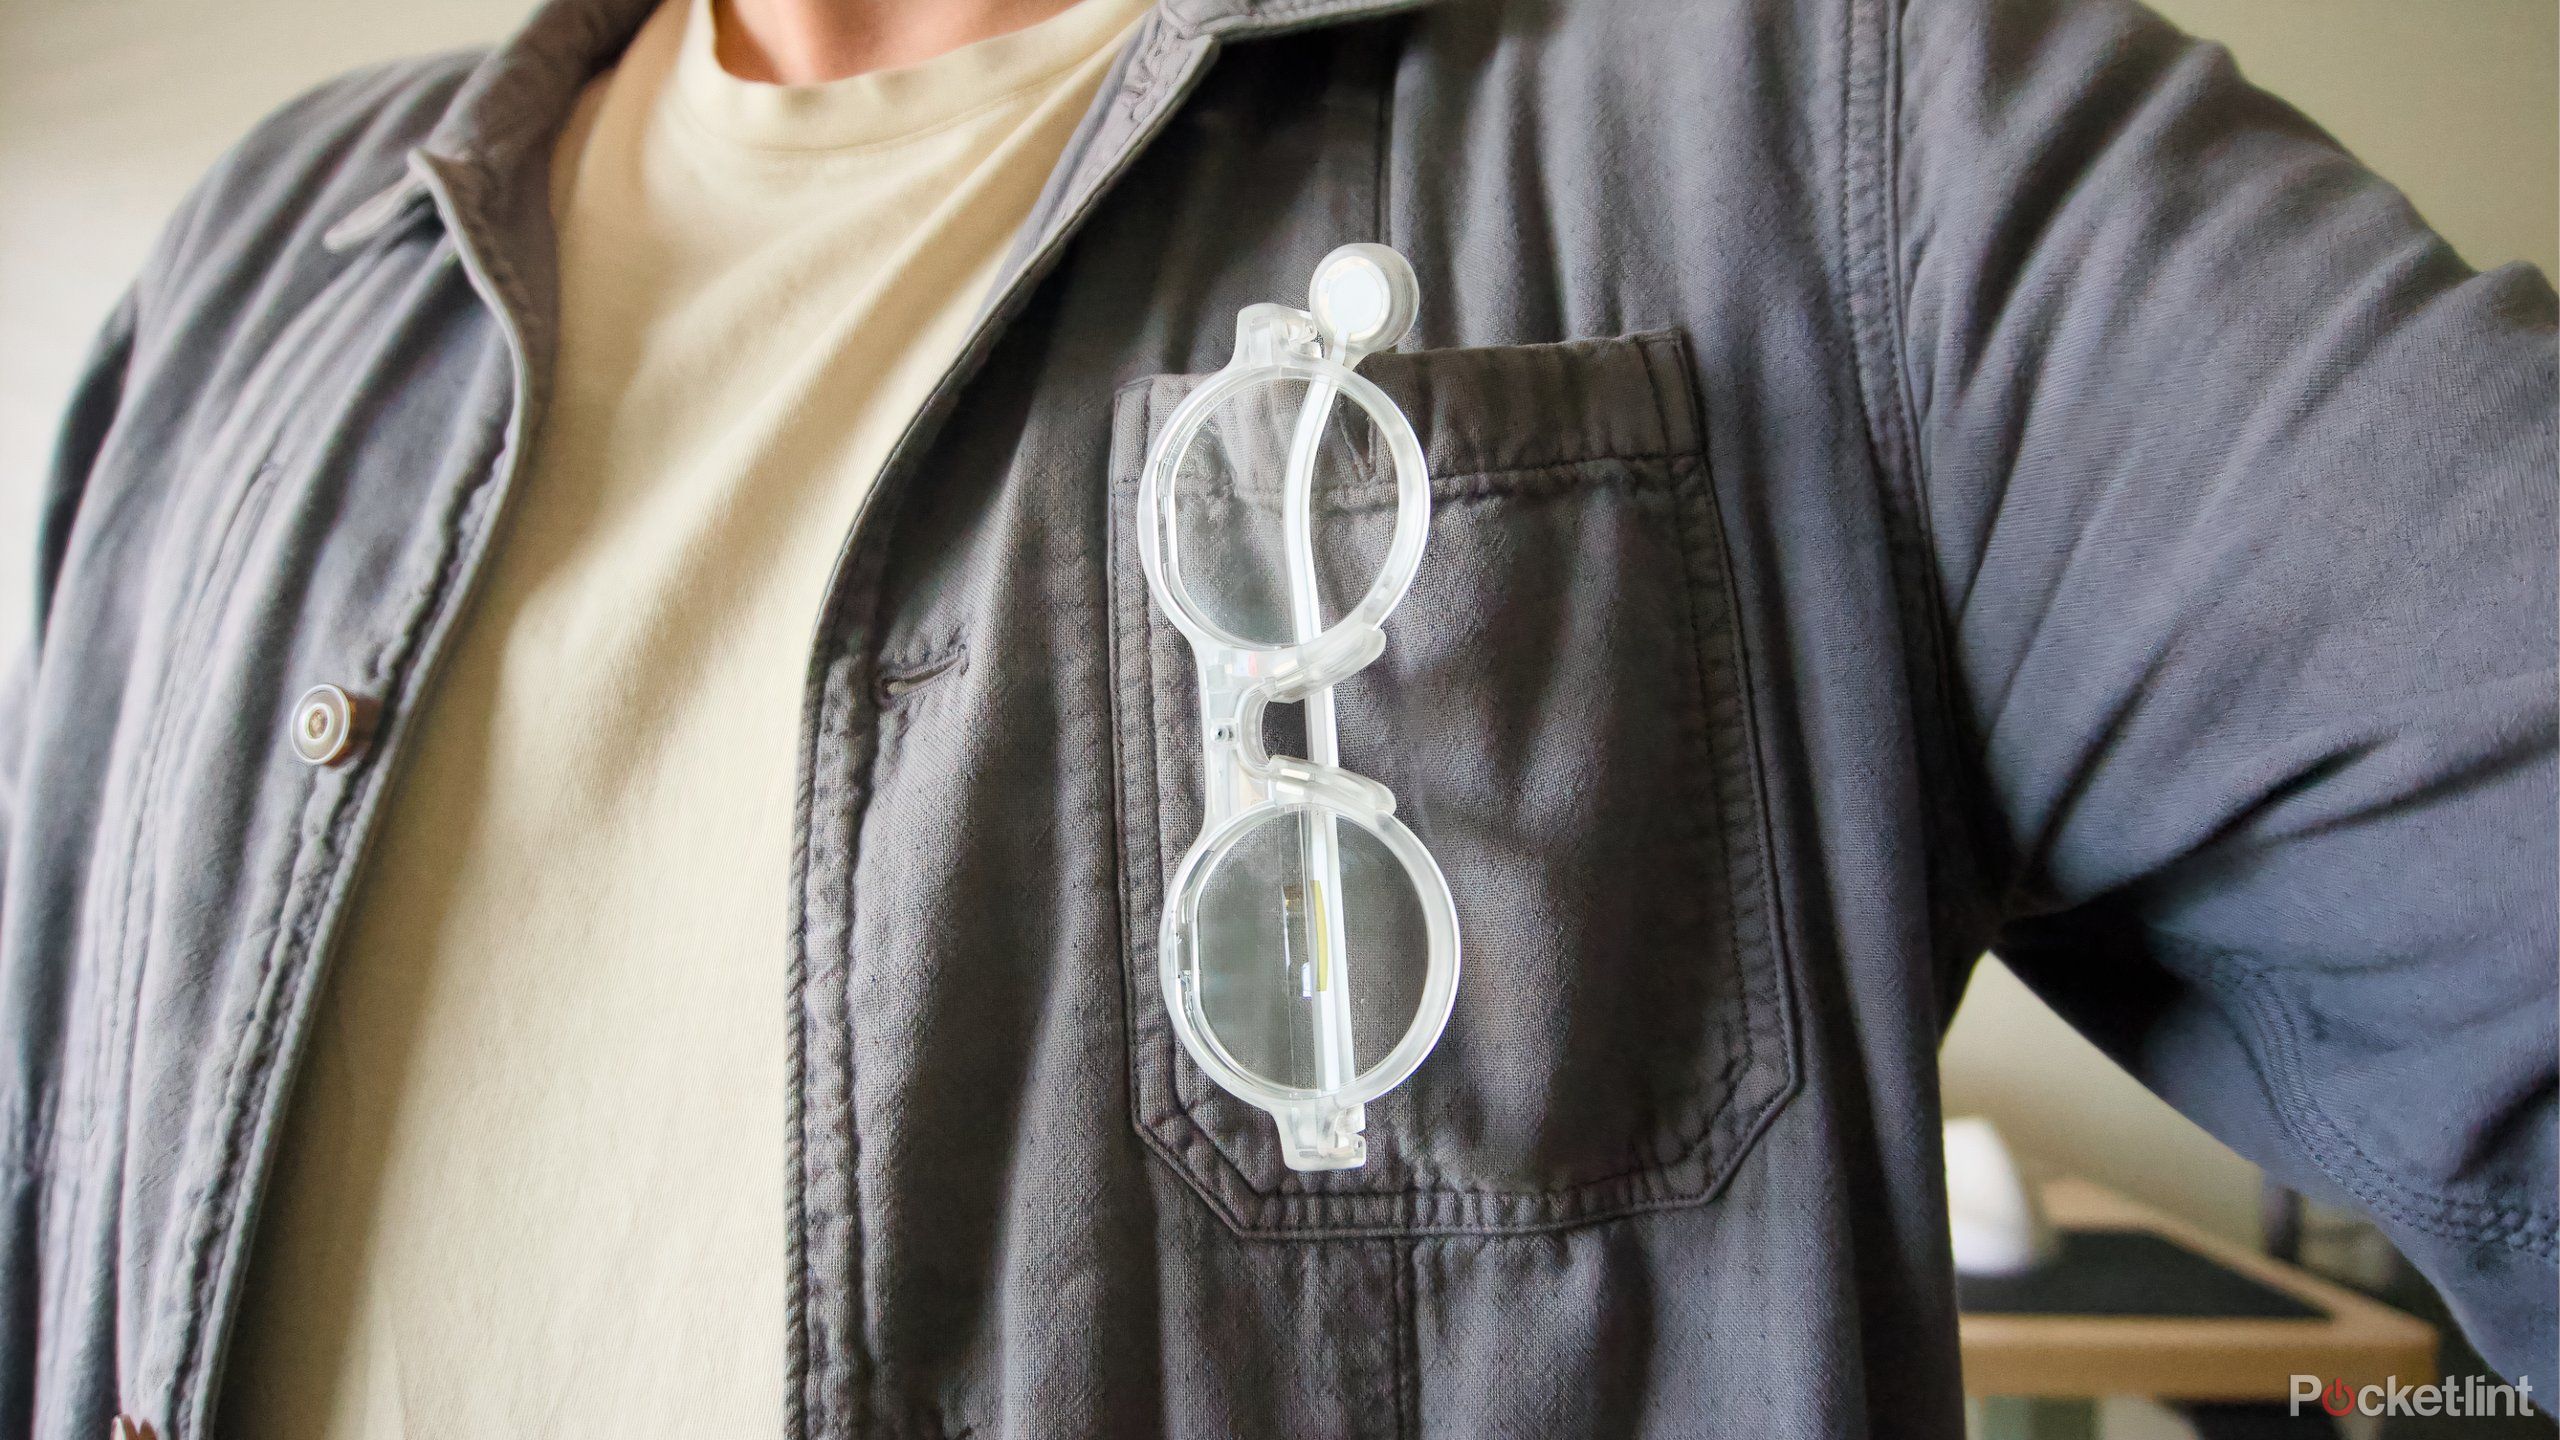 The Brilliant Labs Frame hanging from a jacket.